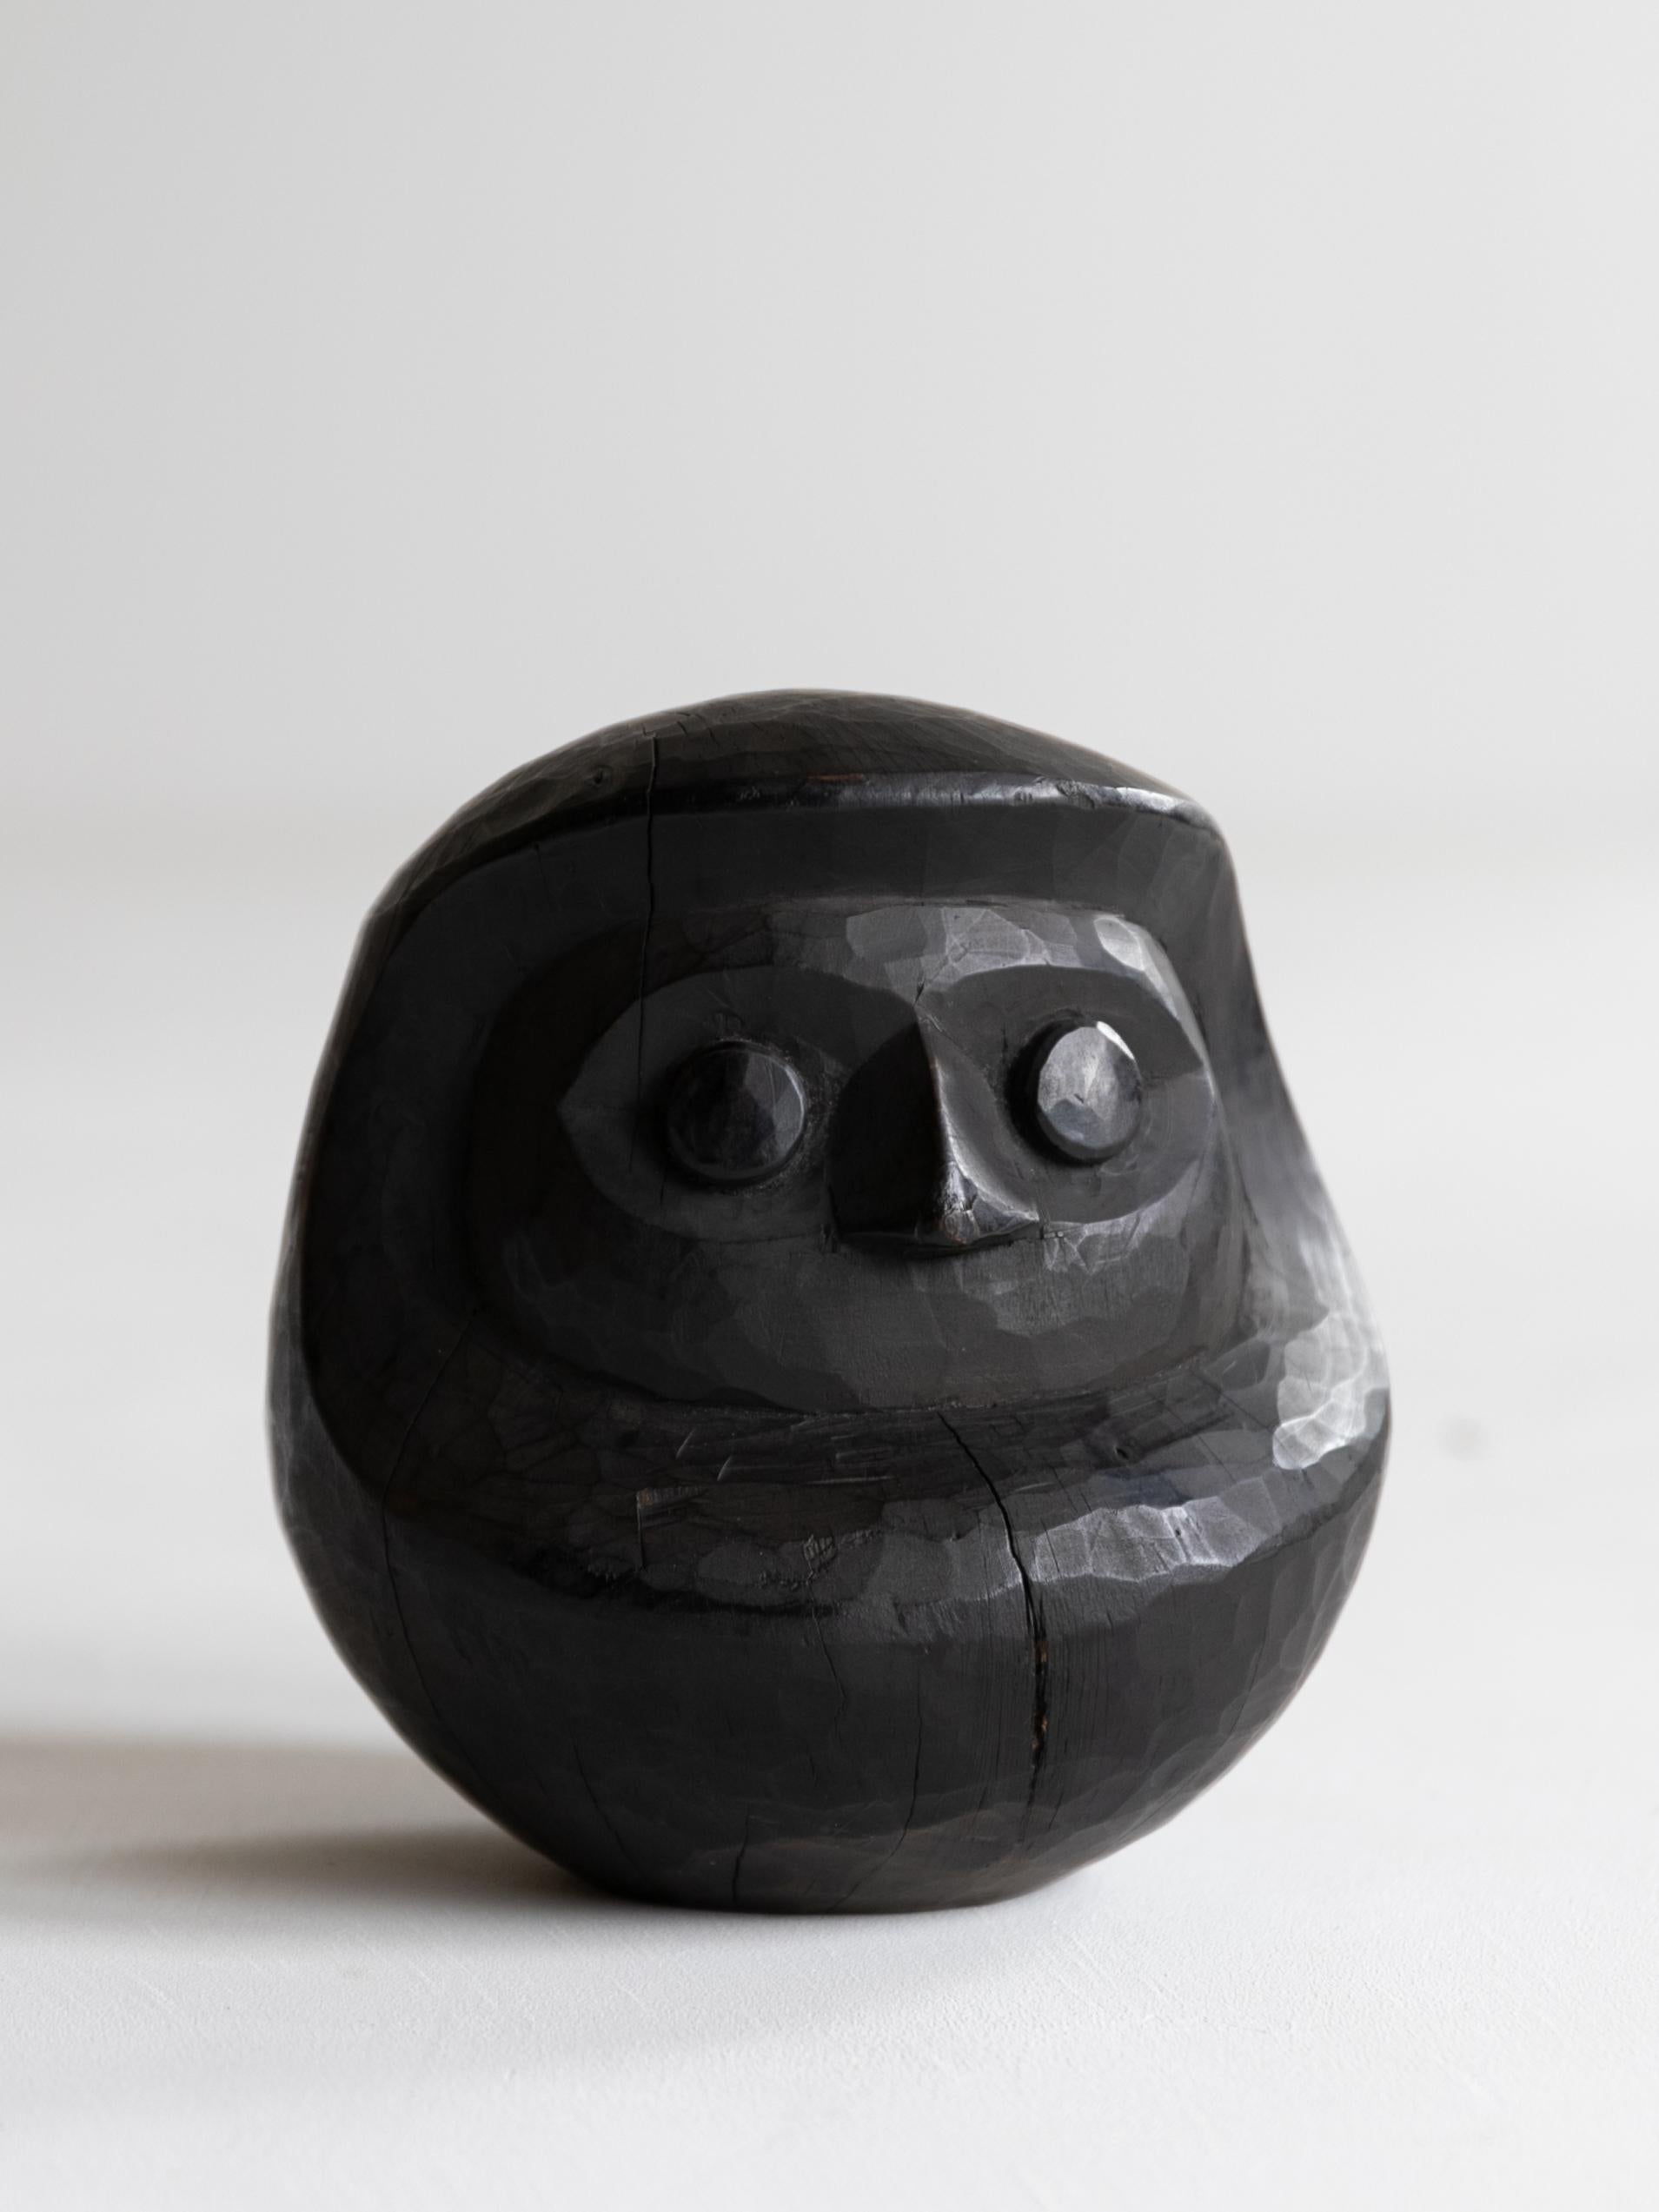 This is an old Japanese large wooden Daruma.
It is from the Meiji period (1860s-1920s).
It is made from a large cedar tree.
It is rustic and beautiful, with traces of hand-carving.

This large size is very rare
This Daruma is a papier-mache